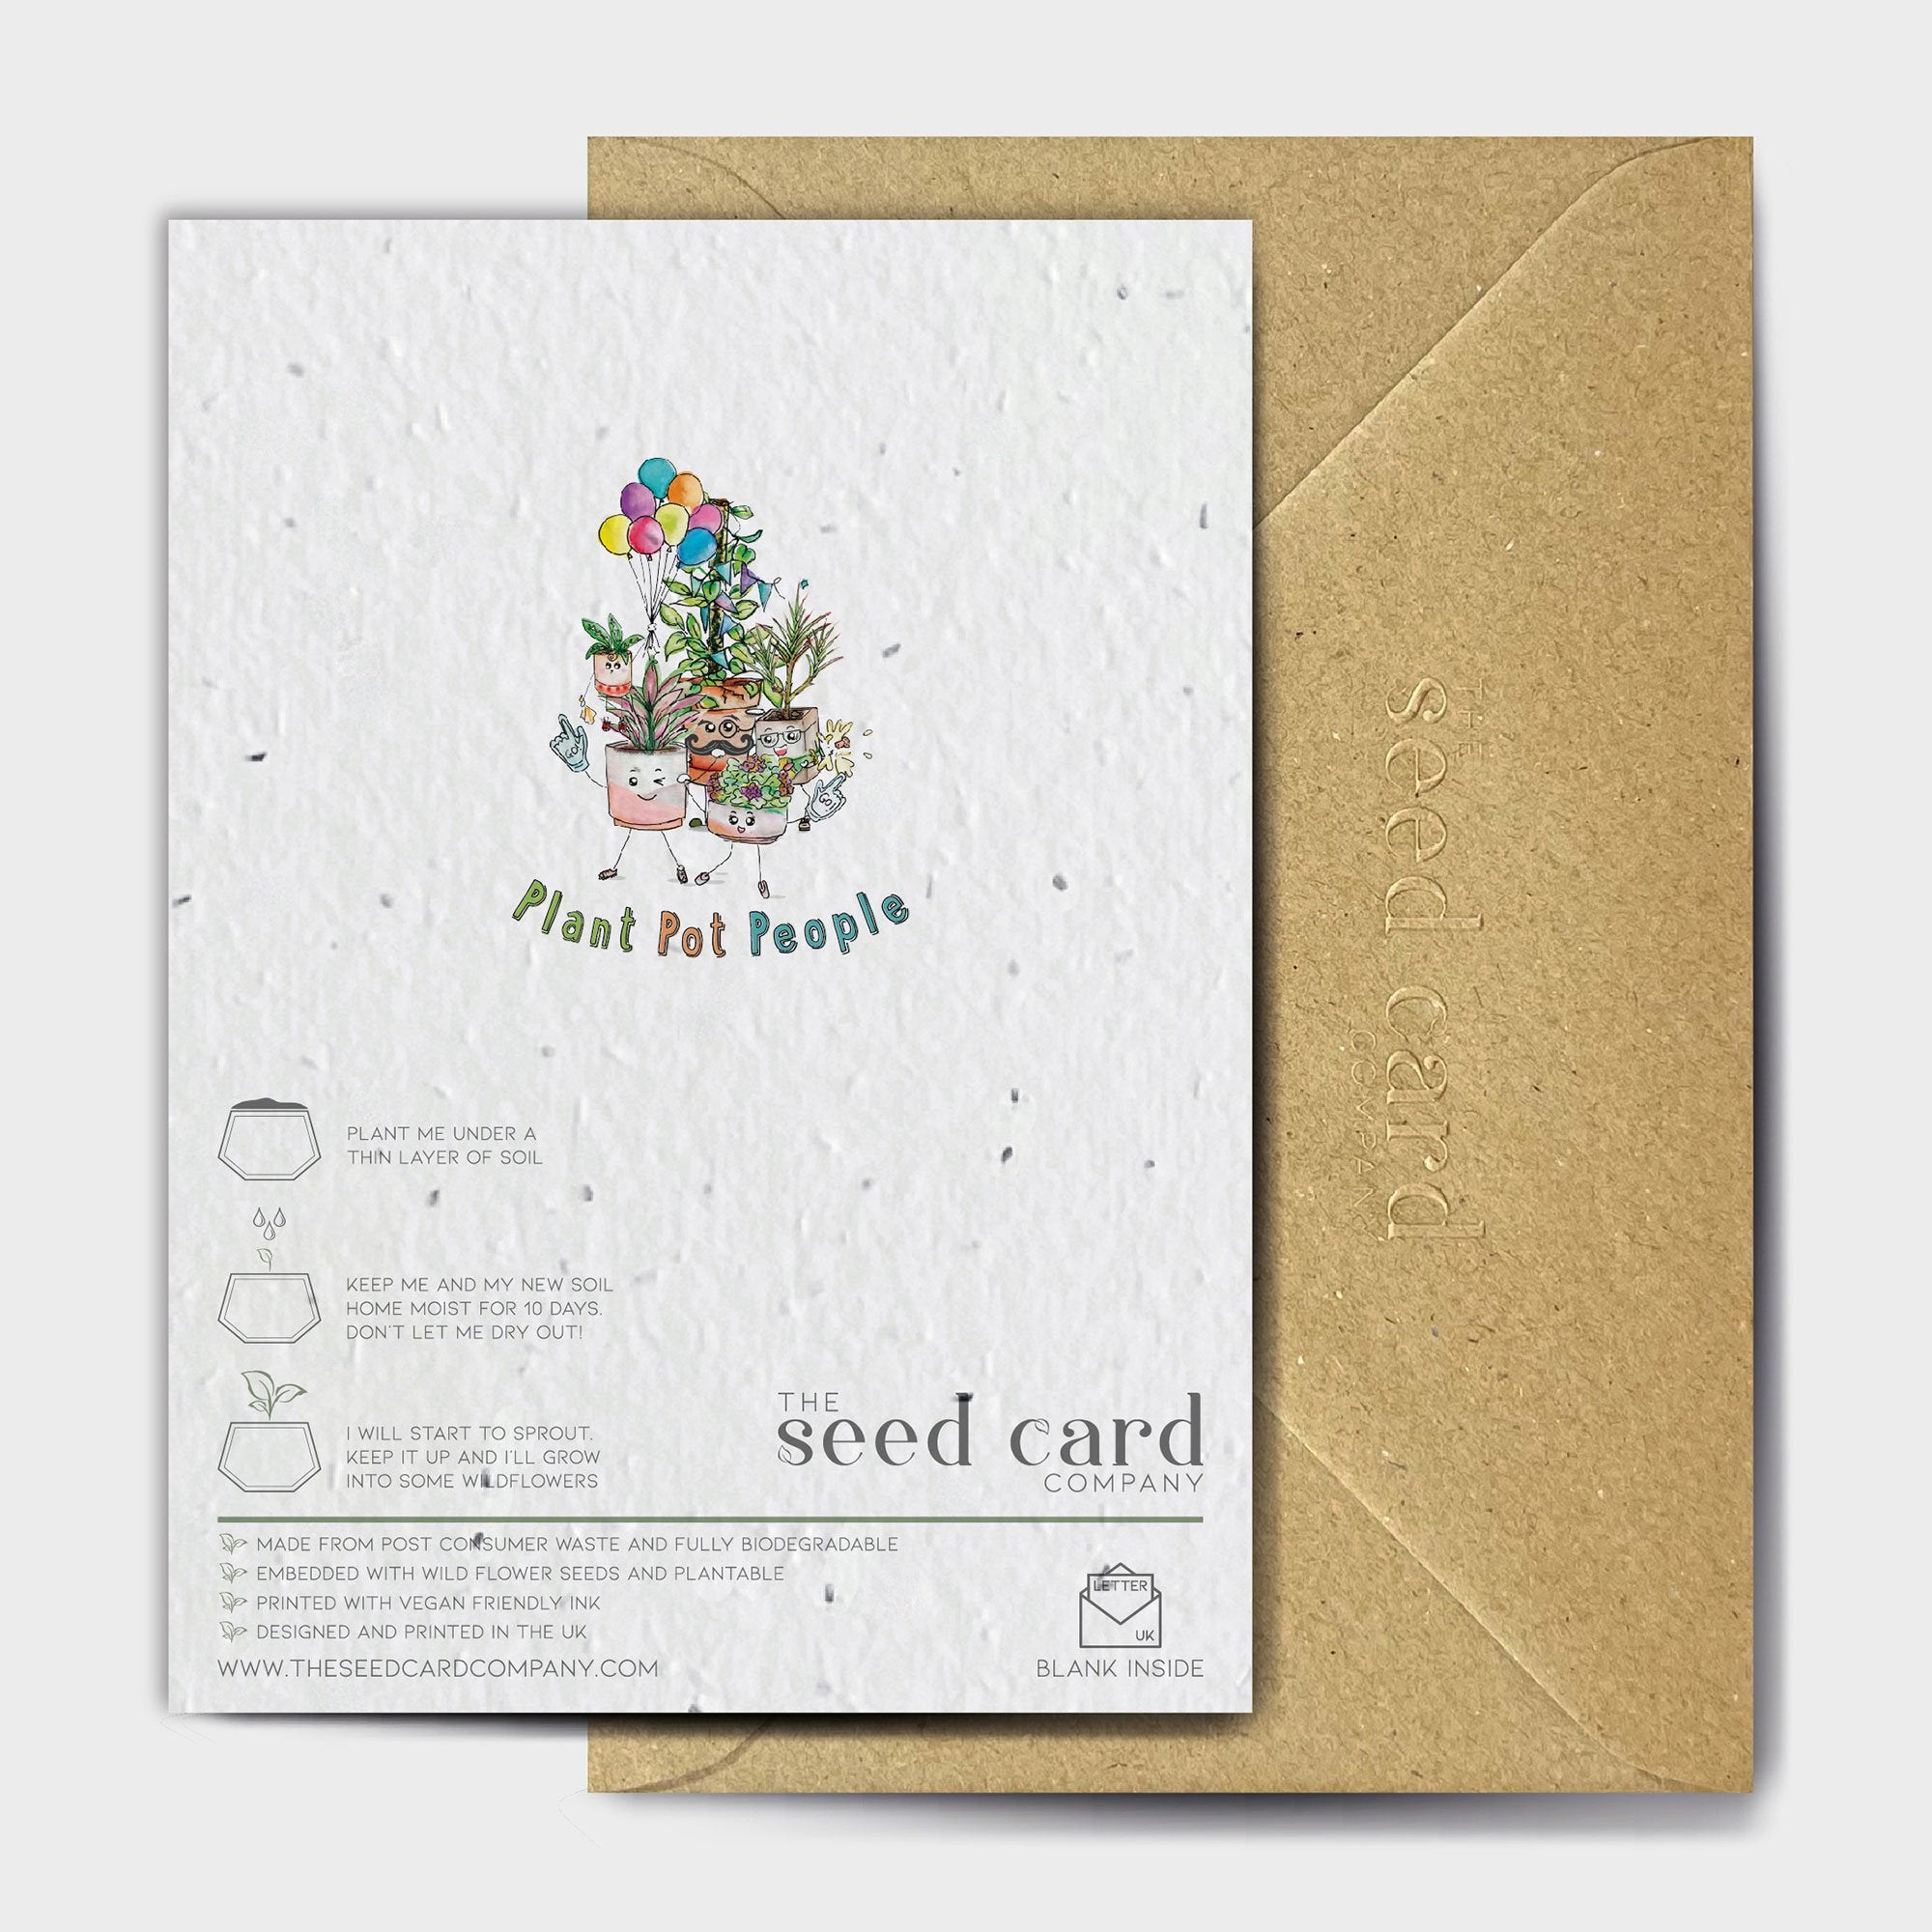 Shop online Rosemary Pun - 100% biodegradable seed-embedded cards Shop -The Seed Card Company